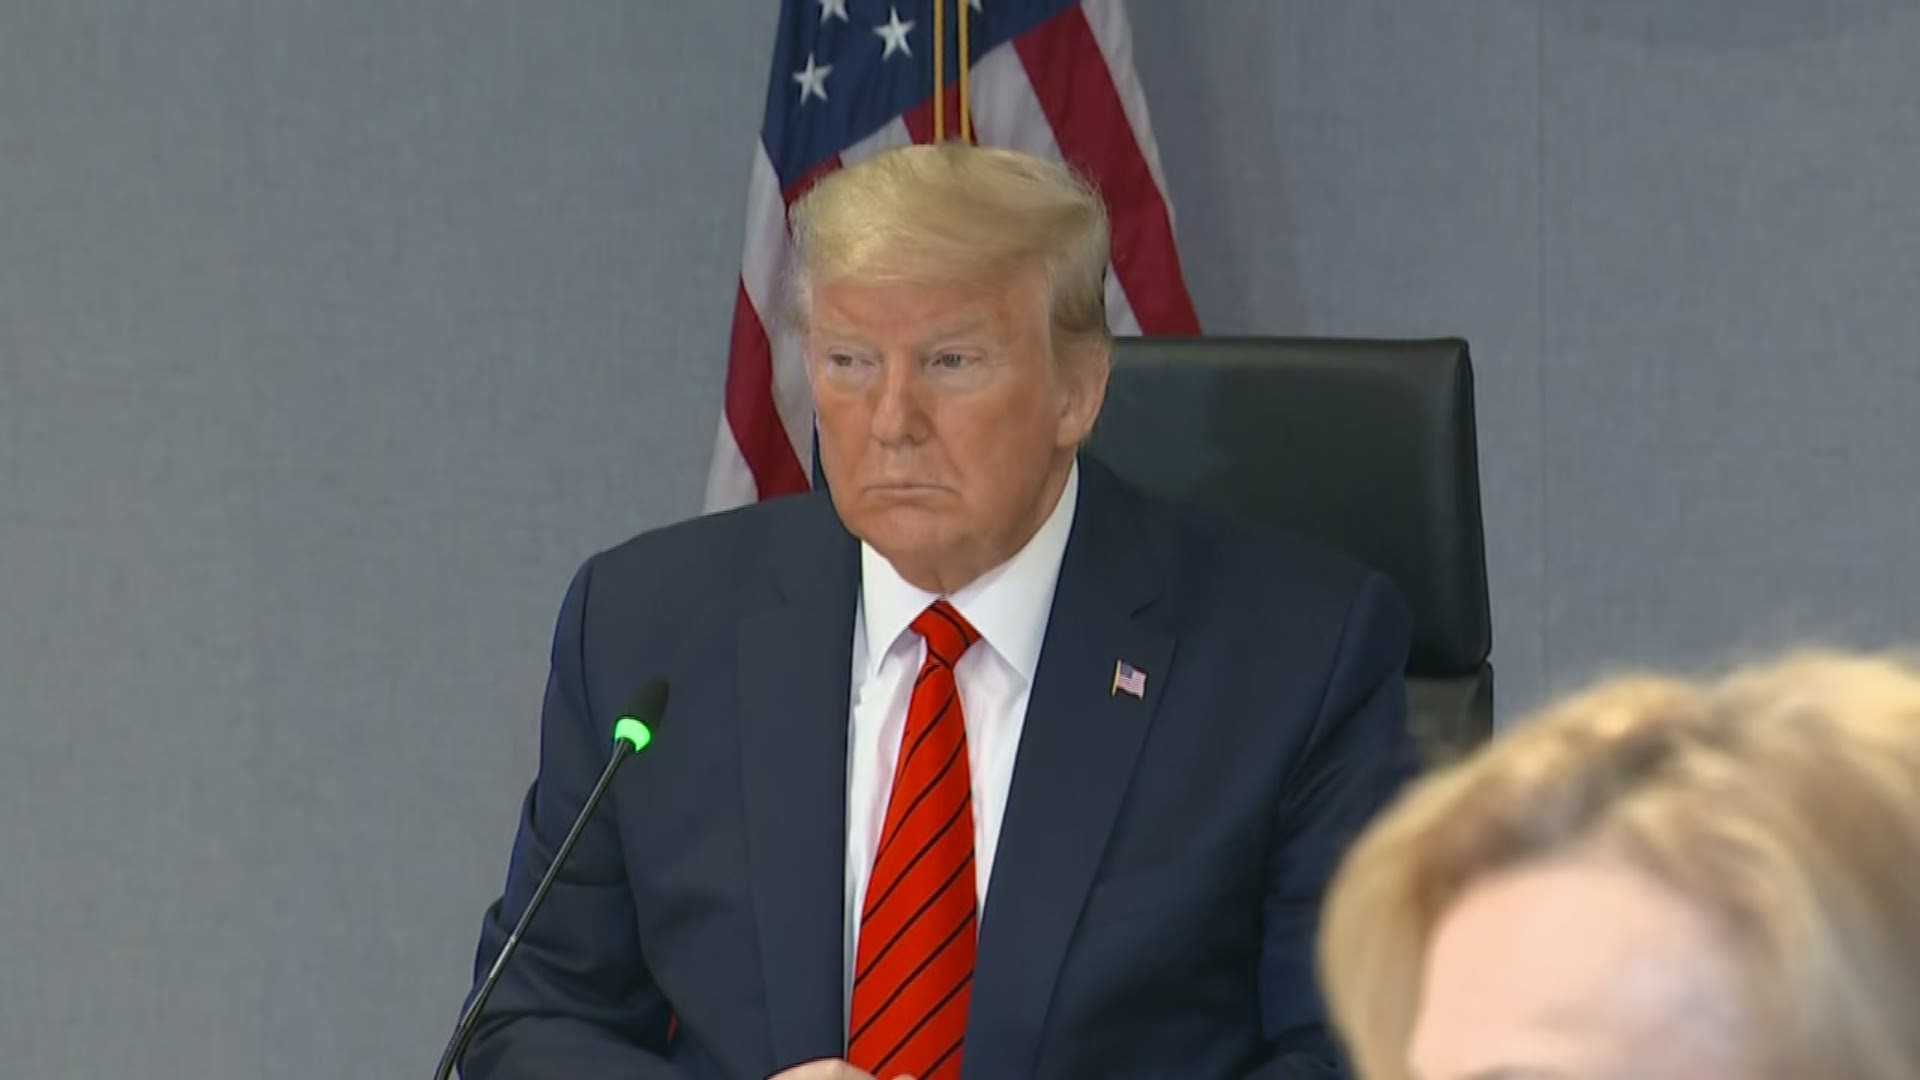 During a visit to FEMA headquarters, President Donald Trump held a call with several of the nation's governors, including Georgia Governor Brian Kemp.